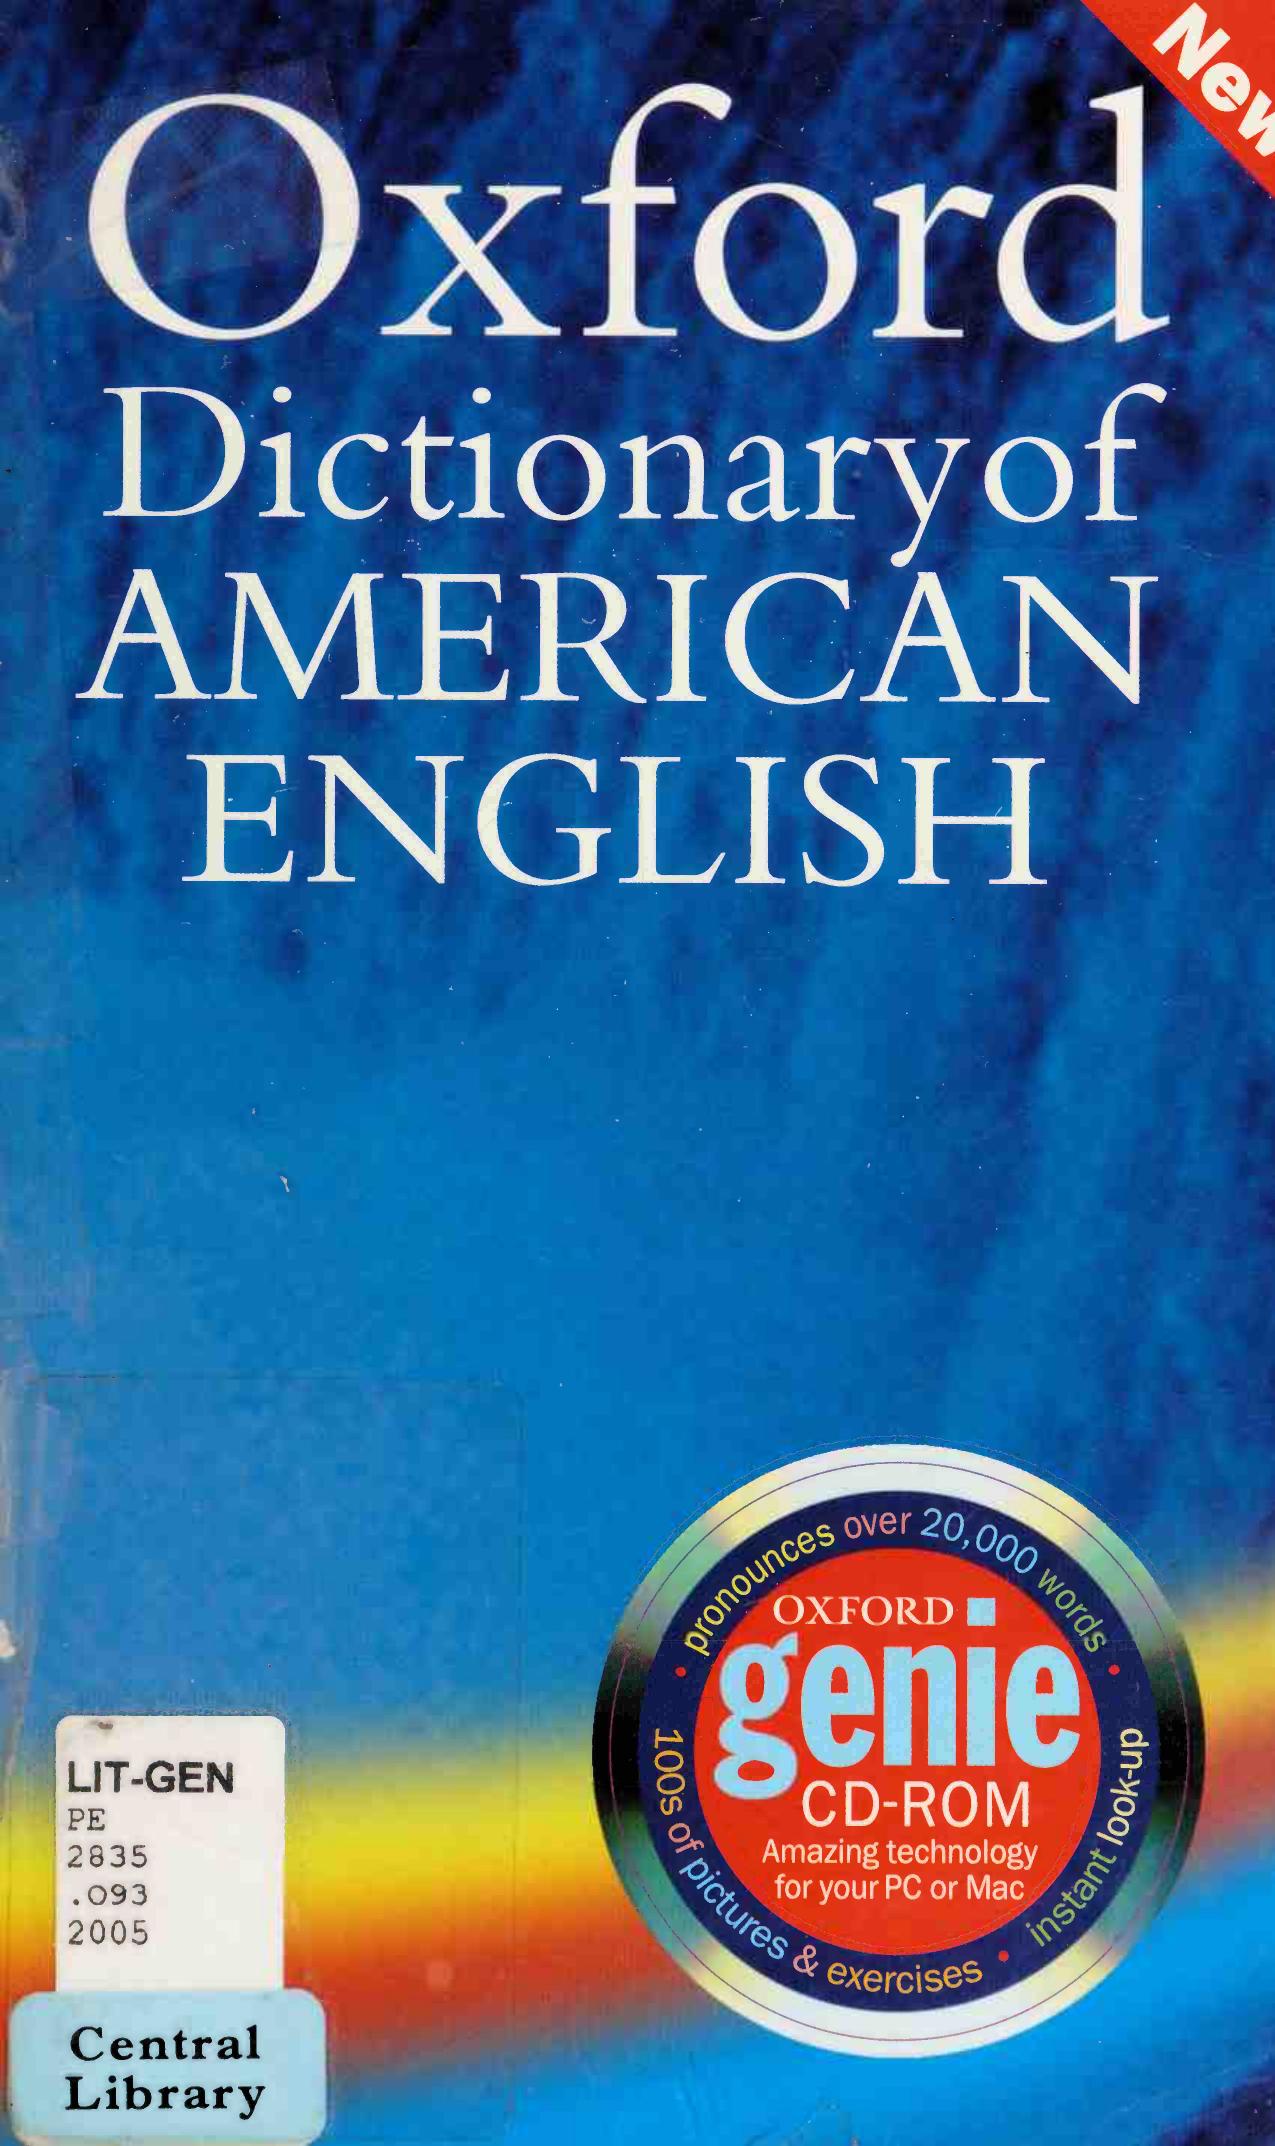 The Oxford Dictionary of American English